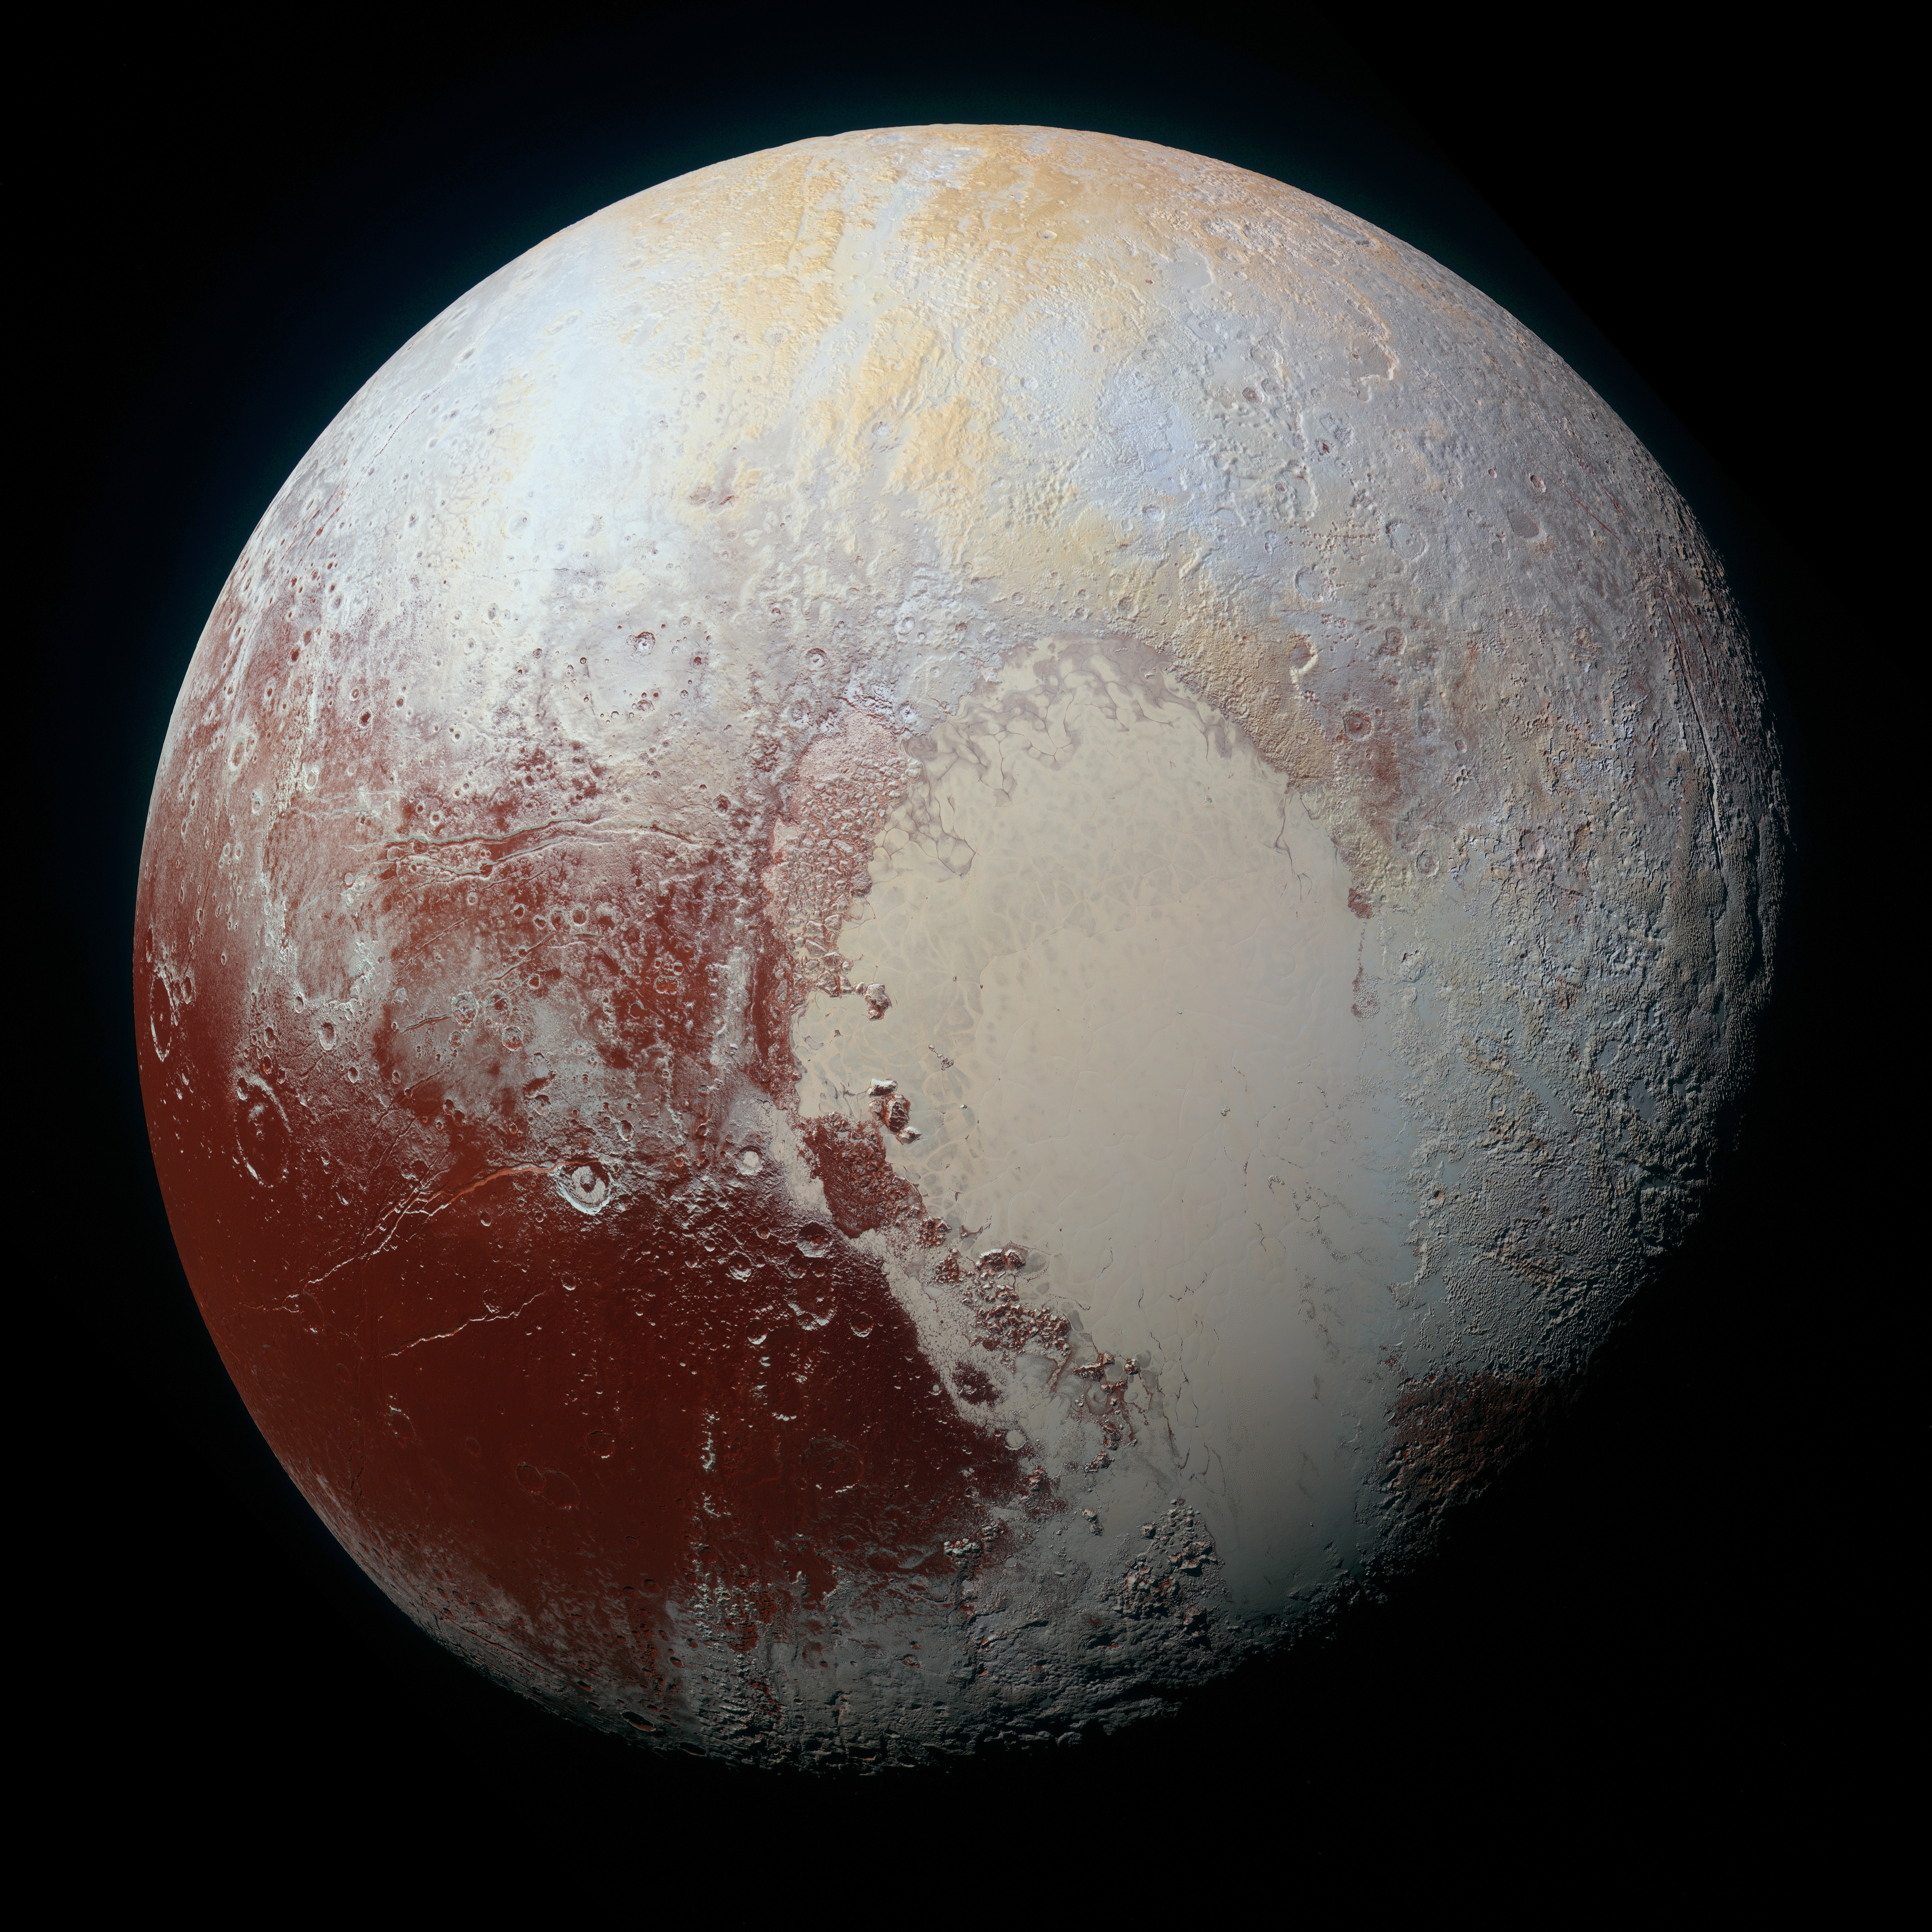 NASA's New Horizons spacecraft captured this high-resolution enhanced color view of Pluto on July 14, 2015. The image combines blue, red and infrared images taken by the Ralph/Multispectral Visual Imaging Camera (MVIC). Pluto’s surface sports a remarkable range of subtle colors, enhanced in this view to a rainbow of pale blues, yellows, oranges, and deep reds. Many landforms have their own distinct colors, telling a complex geological and climatological story that scientists have only just begun to decode. The image resolves details and colors on scales as small as 0.8 miles (1.3 kilometers). The viewer is encouraged to zoom in on the image on a larger screen to fully appreciate the complexity of Pluto’s surface features.